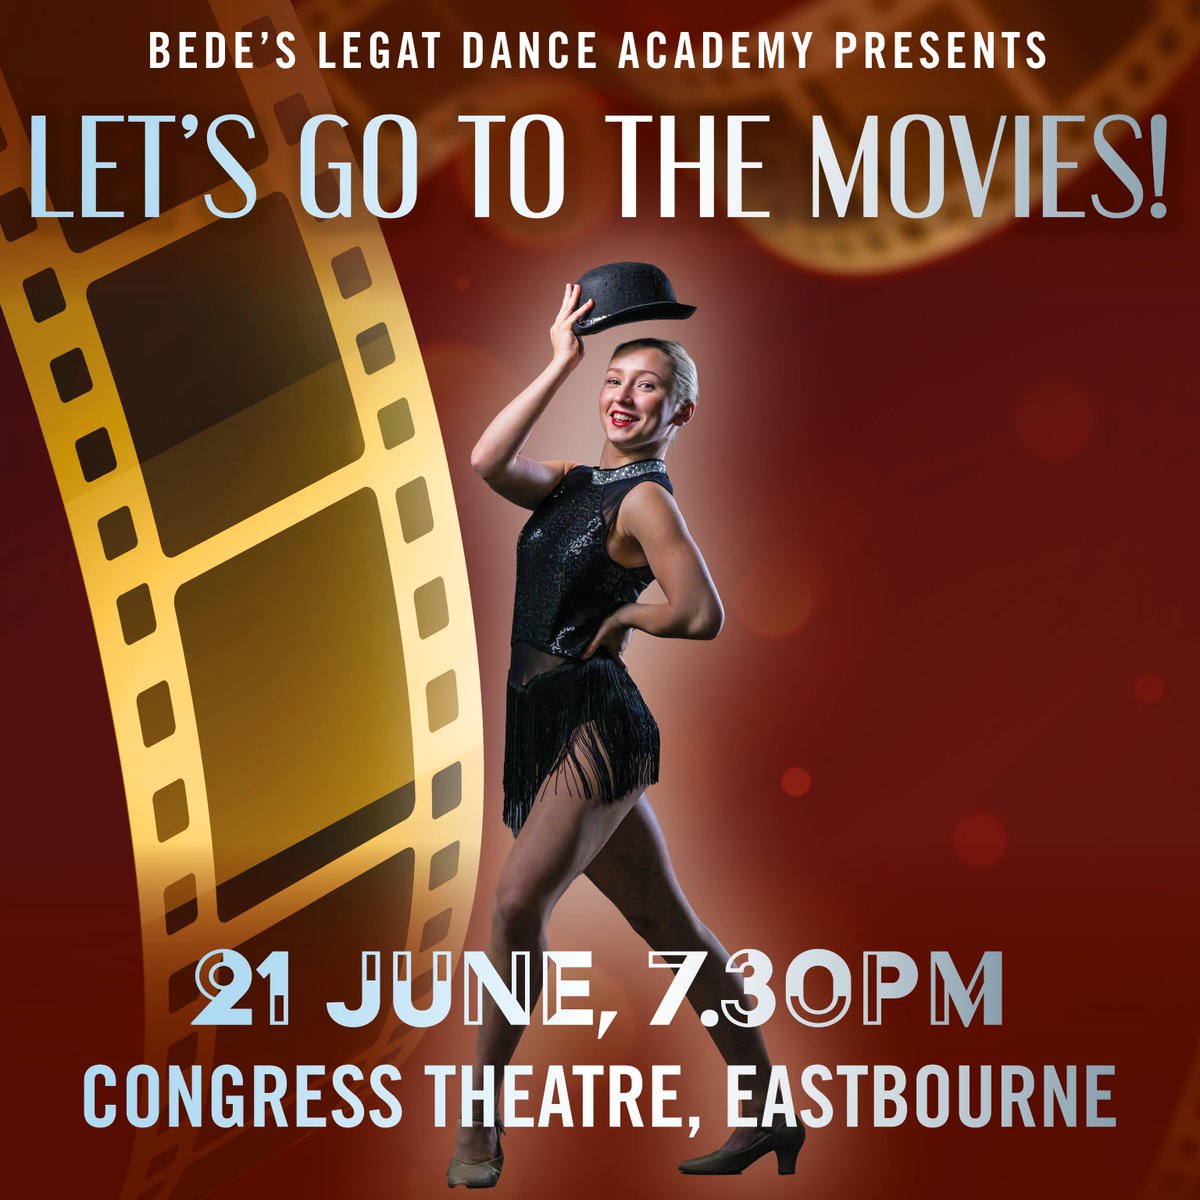 Bede's Legat Dance Academy presents 'Let's Go To The Movies!” at the Congress Theatre on 21 June. From classical ballet numbers to contemporary hits, Bede's Legat dancers are ready to transport you to the silver screen: tinyurl.com/4b4hpc5v